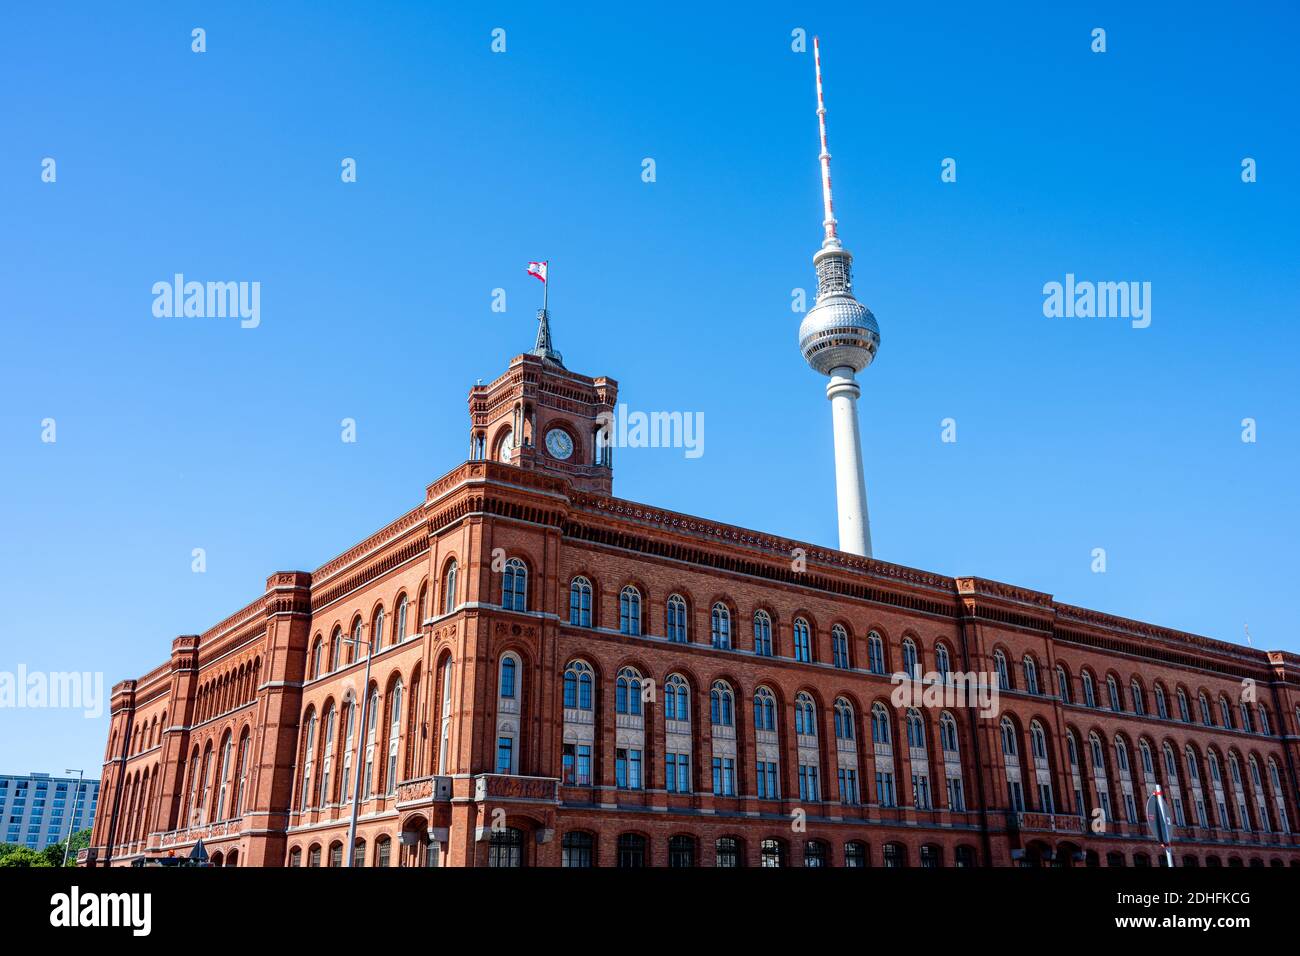 The famous Television Tower and the city hall in Berlin in front of a clear blue sky Stock Photo